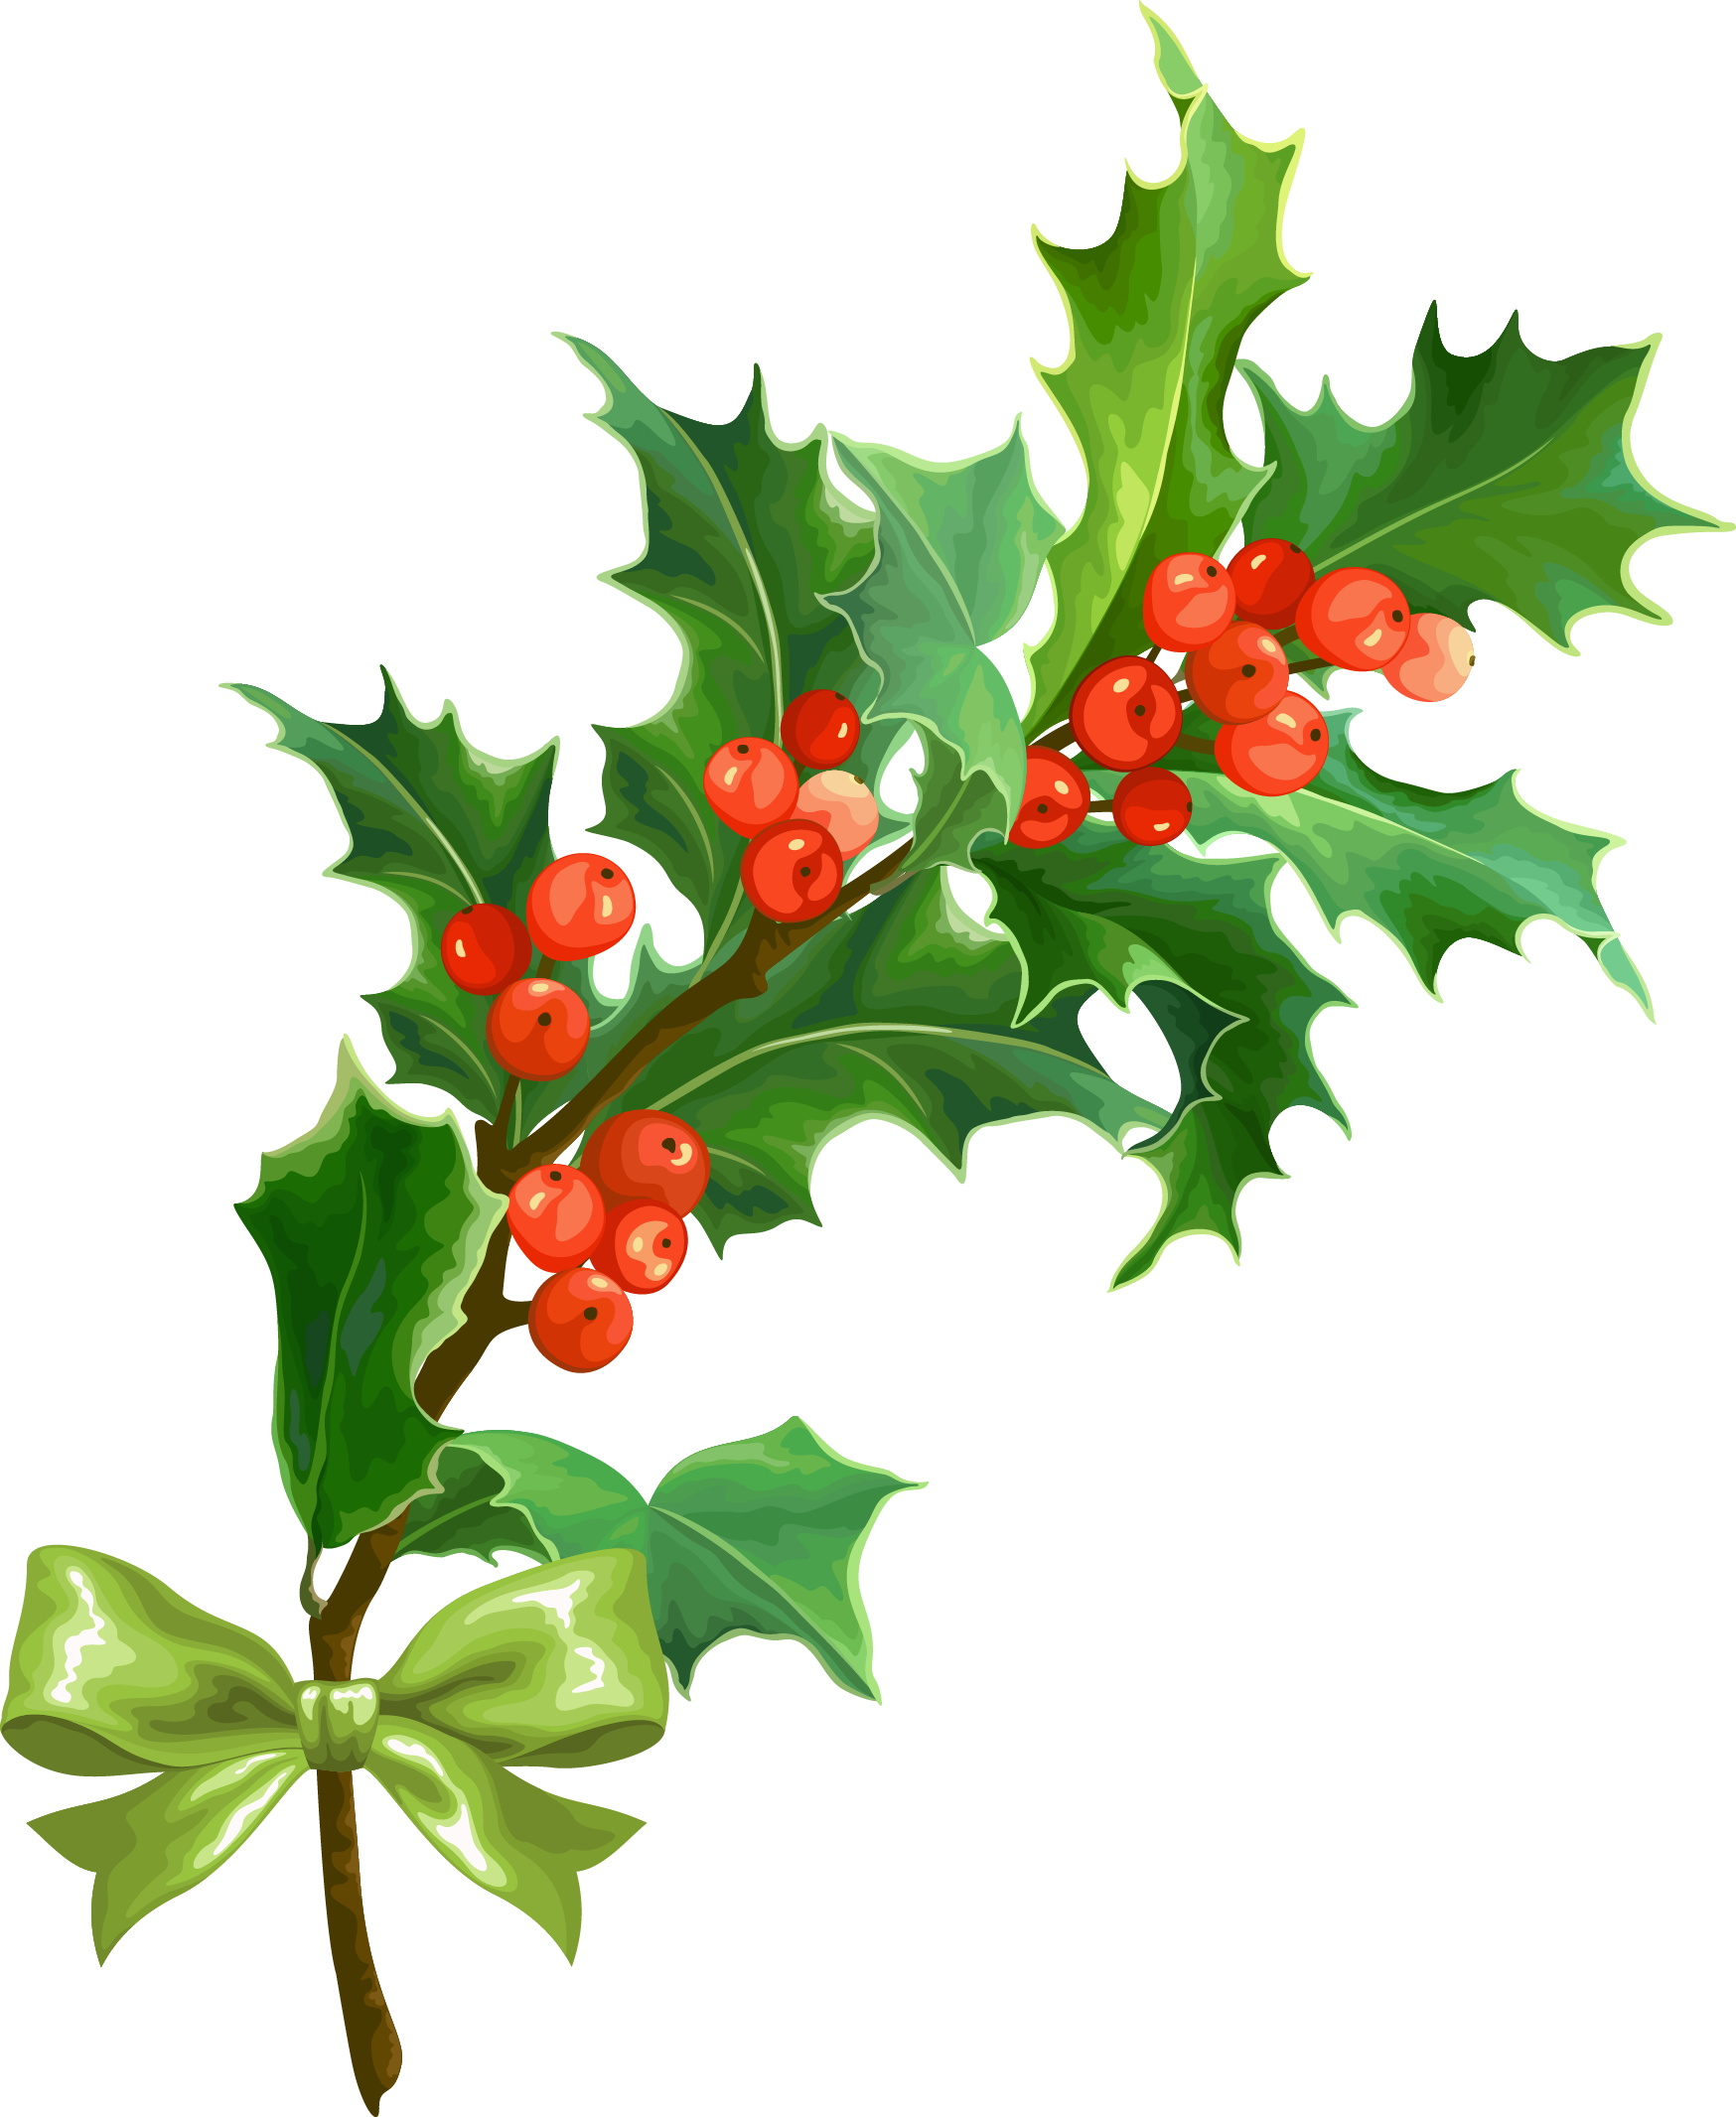 christmas-holly-leaf-creative-christmas-png-download-1748-2132-free-transparent-christmas